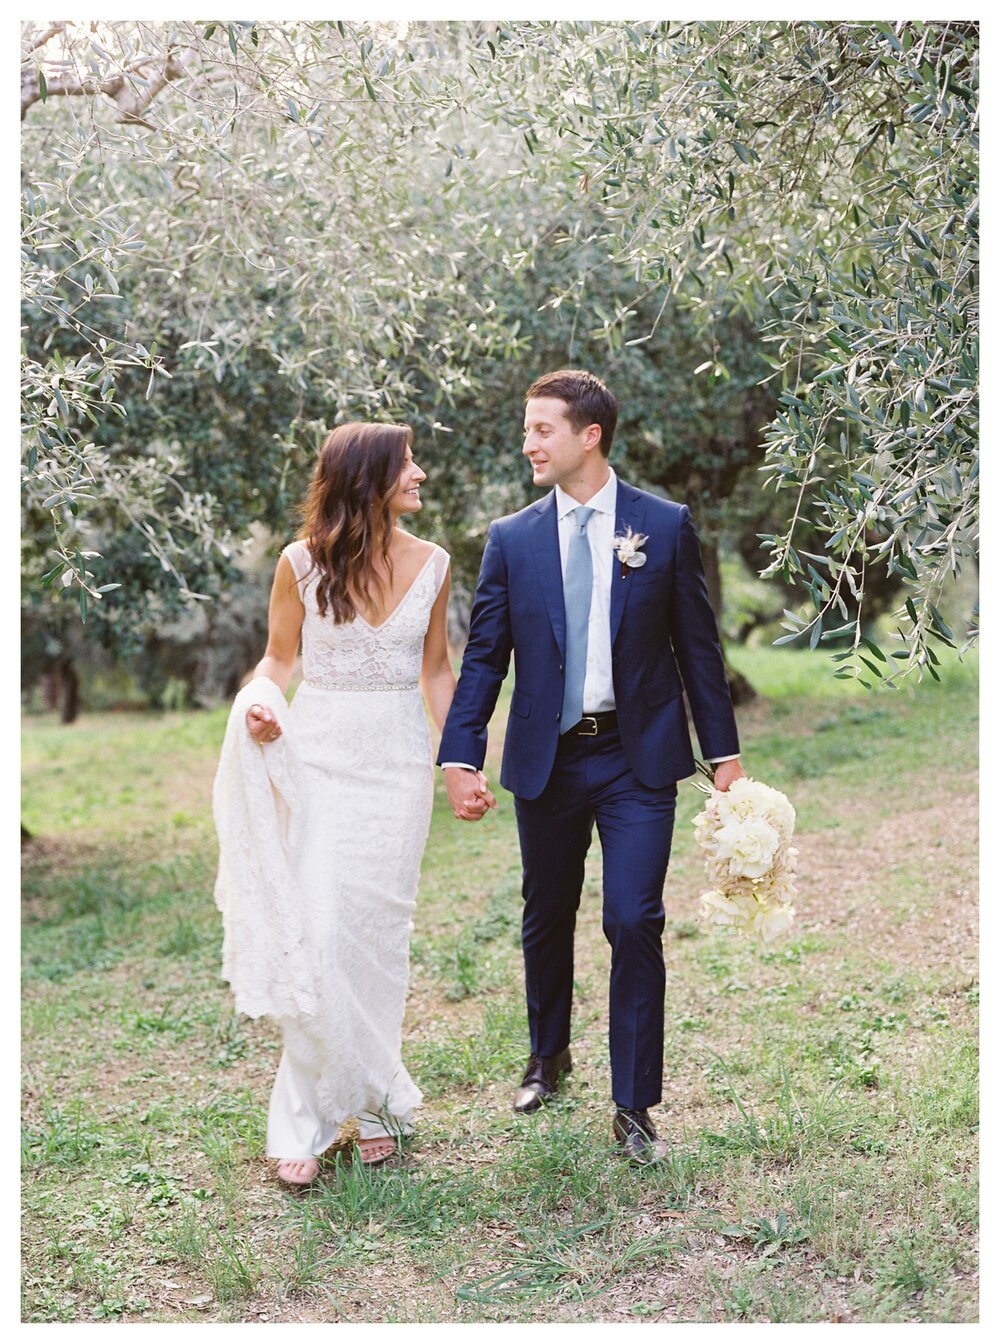  bride and groom wedding photos in olive grove in tuscany italy, villa le fontanelle wedding photos, tuscany wedding ideas, groom holding bouquet, bride bouquet roses, lace wedding dress fitted, florence wedding, florence wedding photos, tuscany wedding photography, bride and groom walking holding hands 